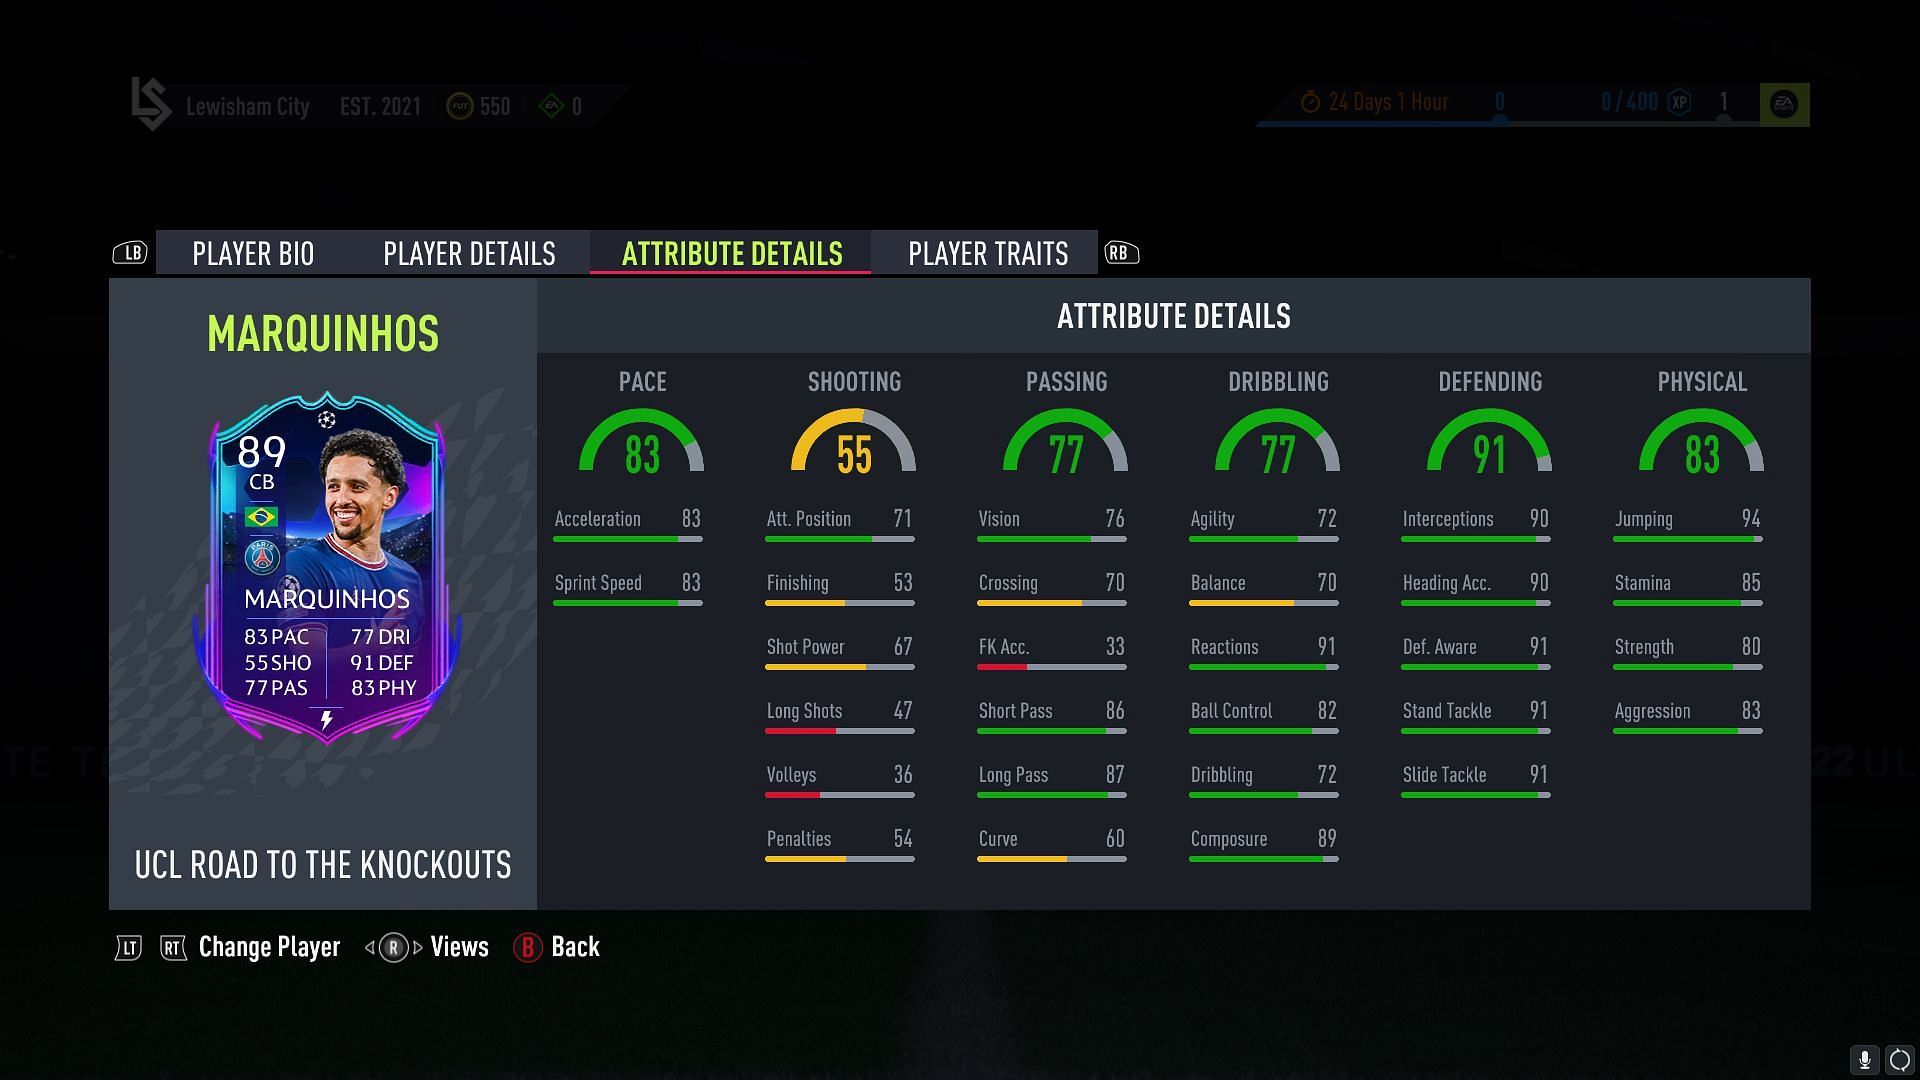 Will the defender feature in the 90s in the next upgrade? (Image via Sportskeeda)